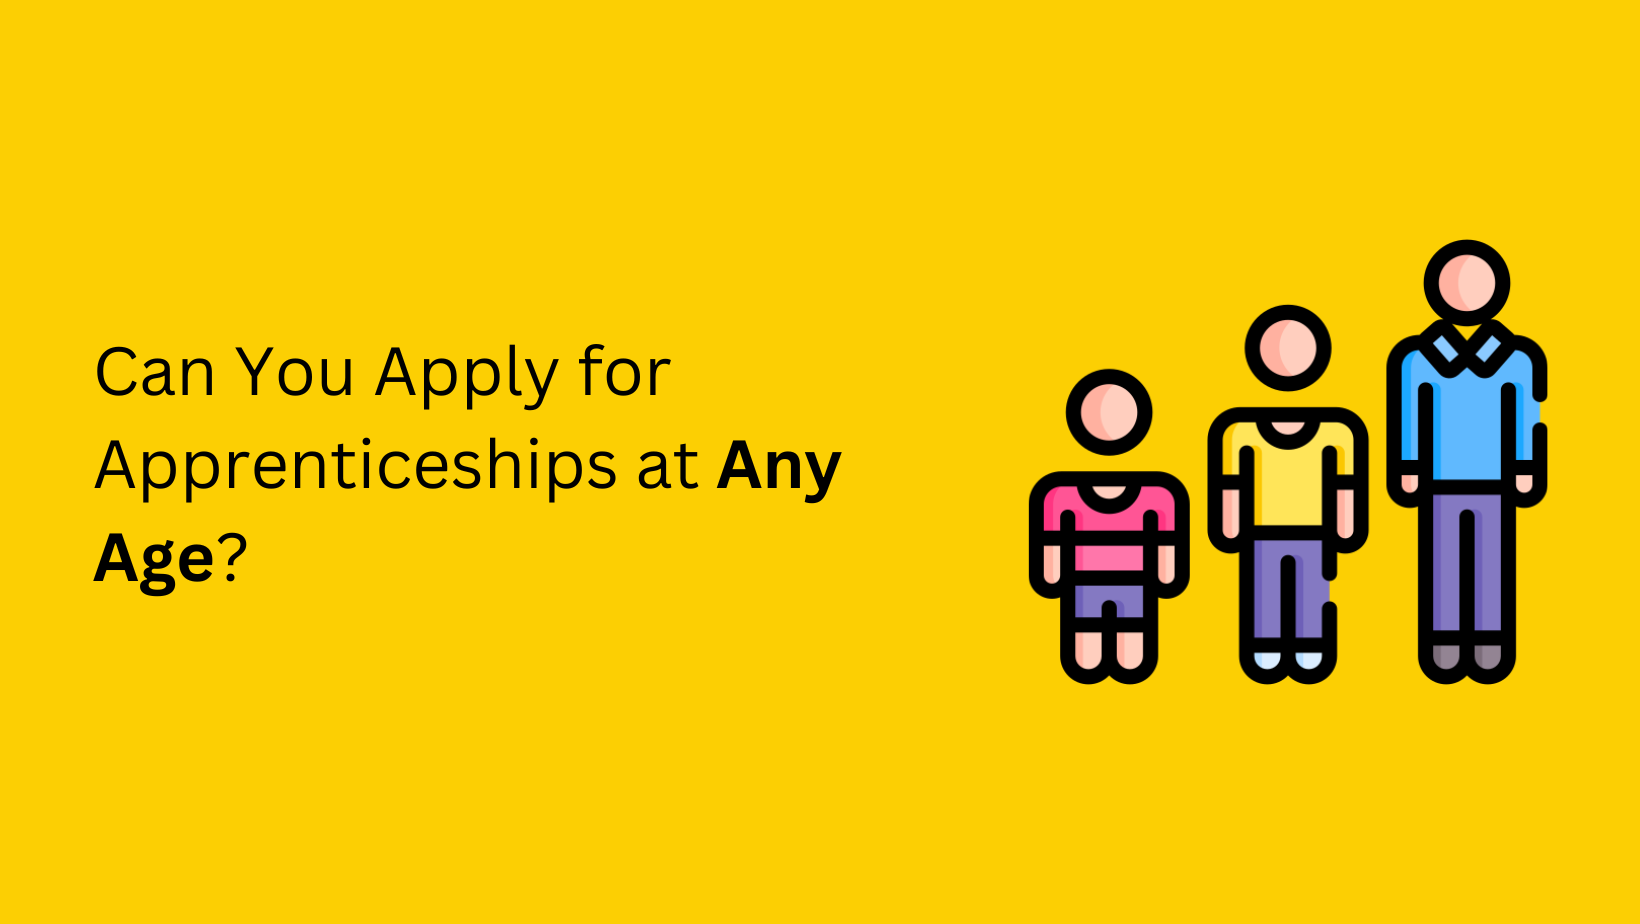 Can You Apply for Apprenticeships at Any Age